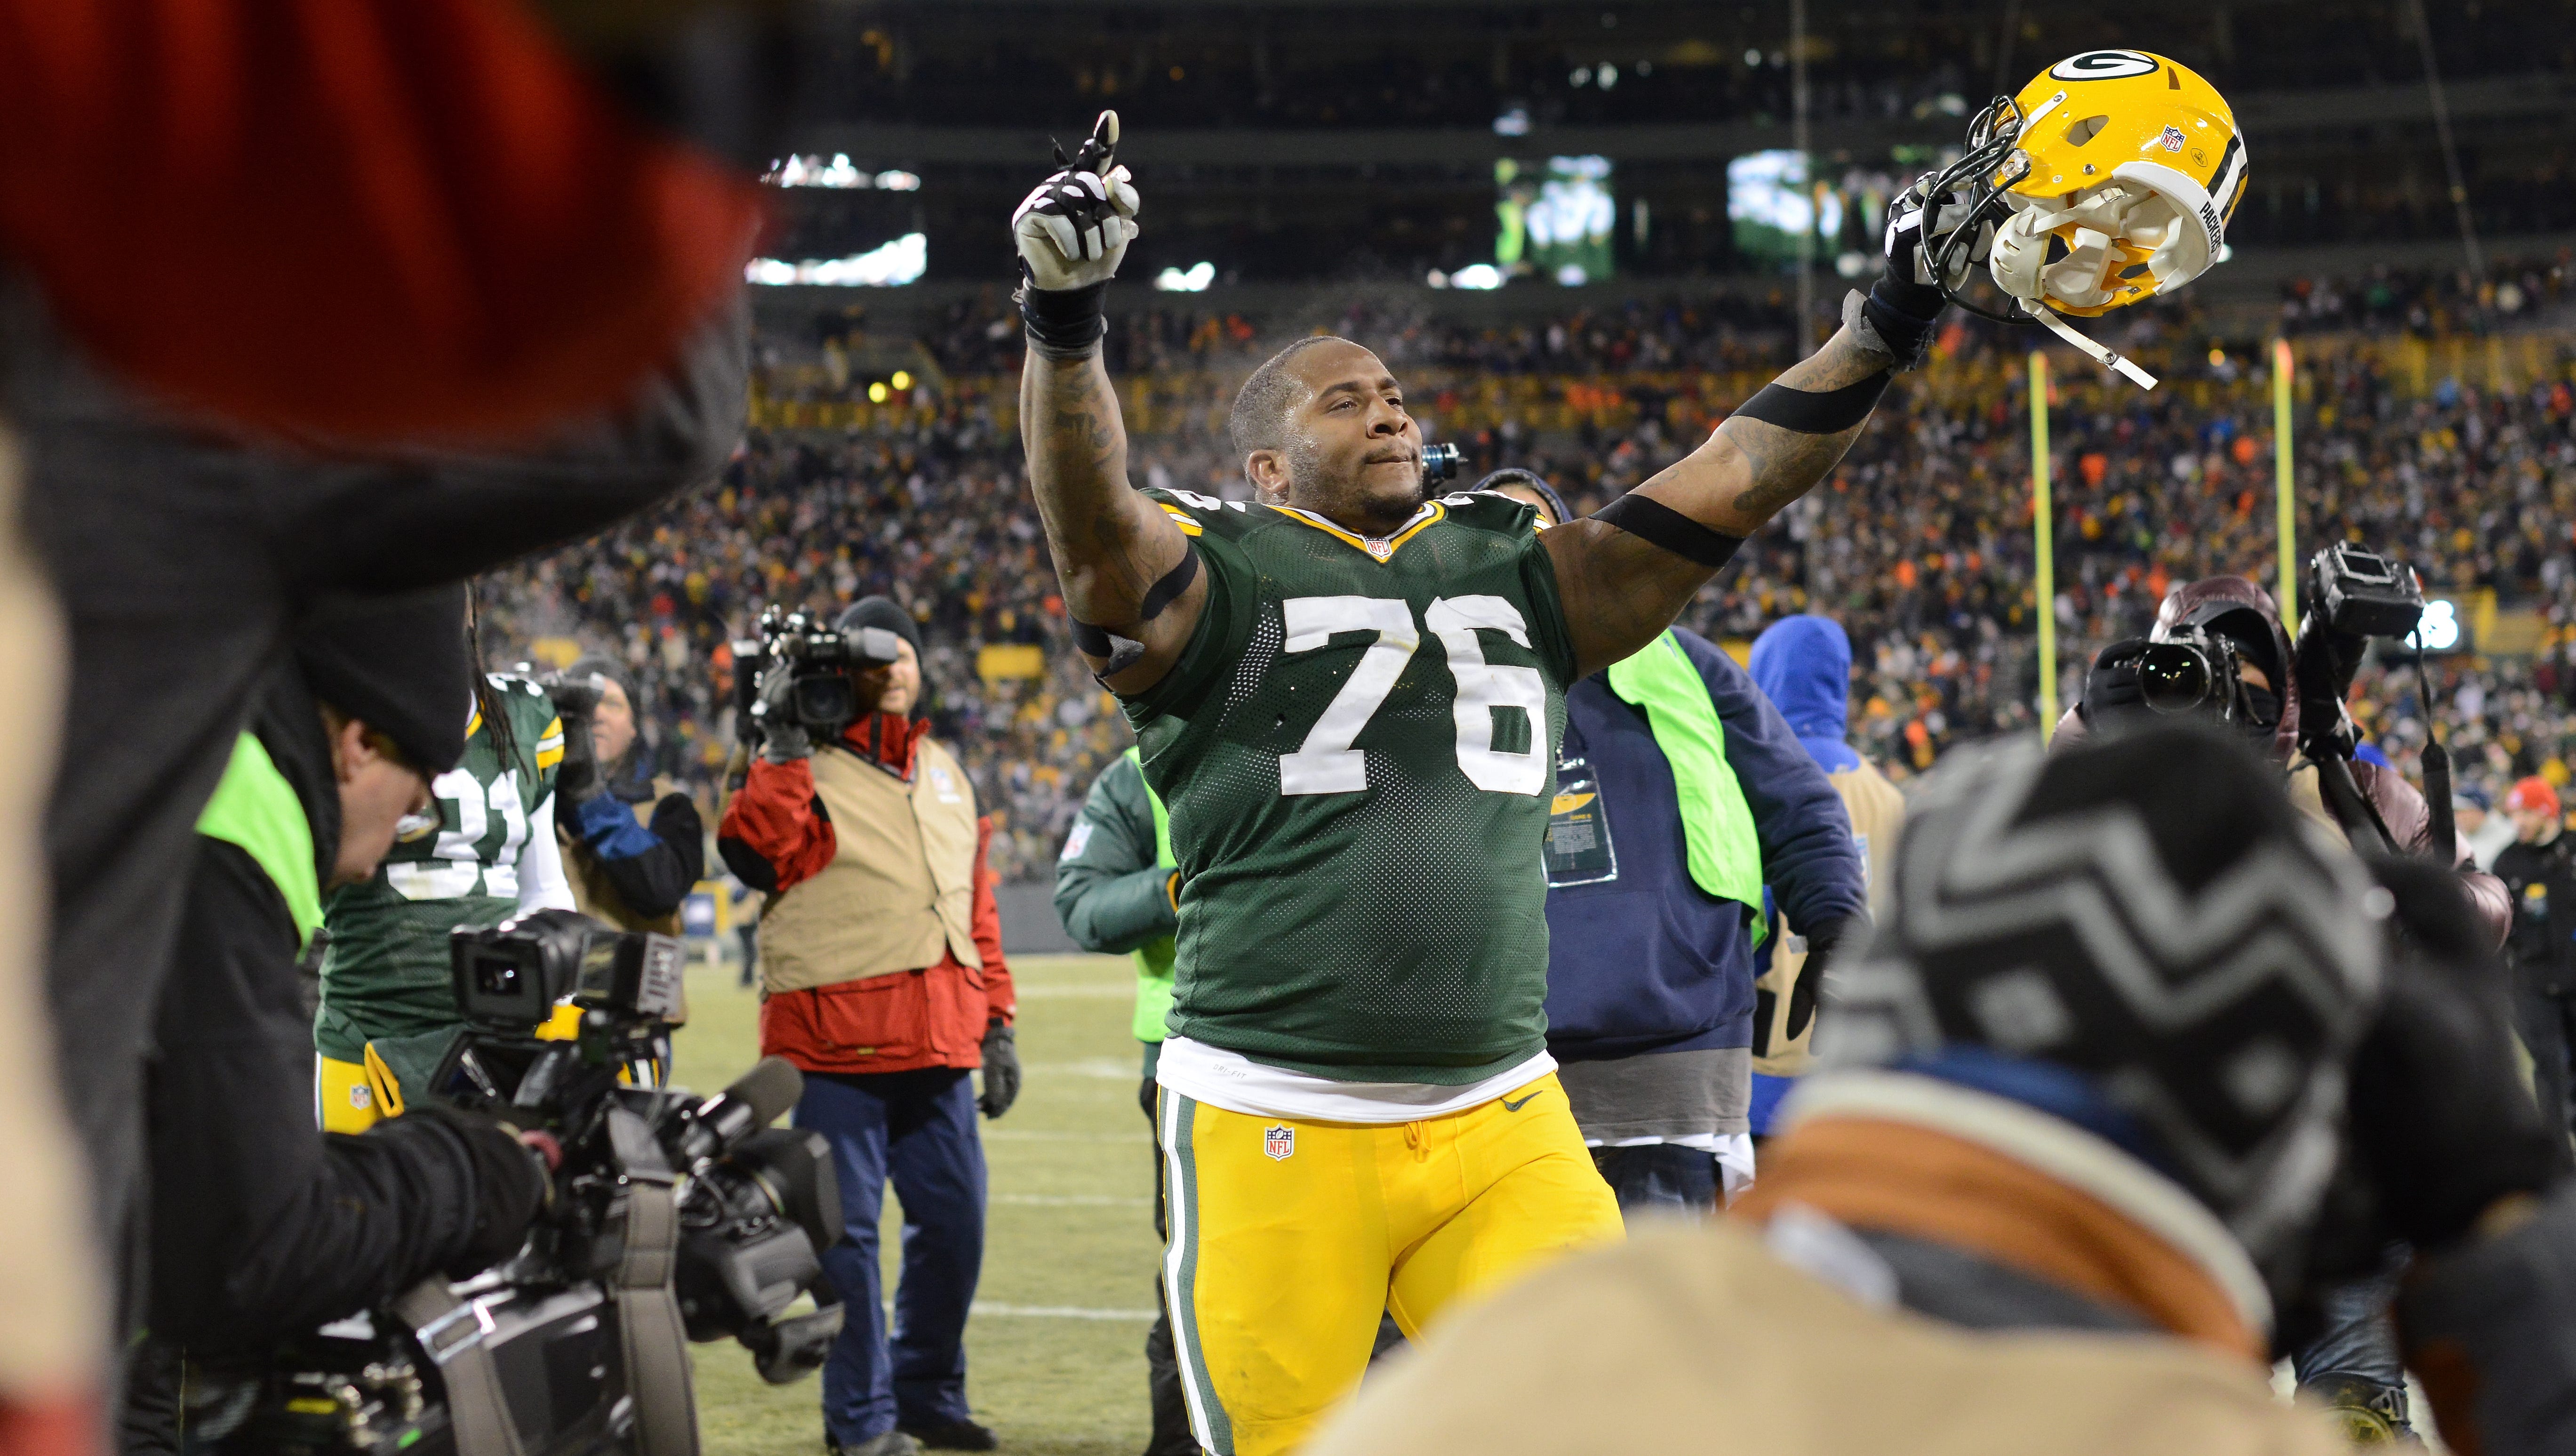 Green Bay Packers defensive tackle Mike Daniels (76) raises his hands to the crowd as he makes his way to the locker room following a victory over the New England Patriots on Nov. 30, 2014, at Lambeau Field.